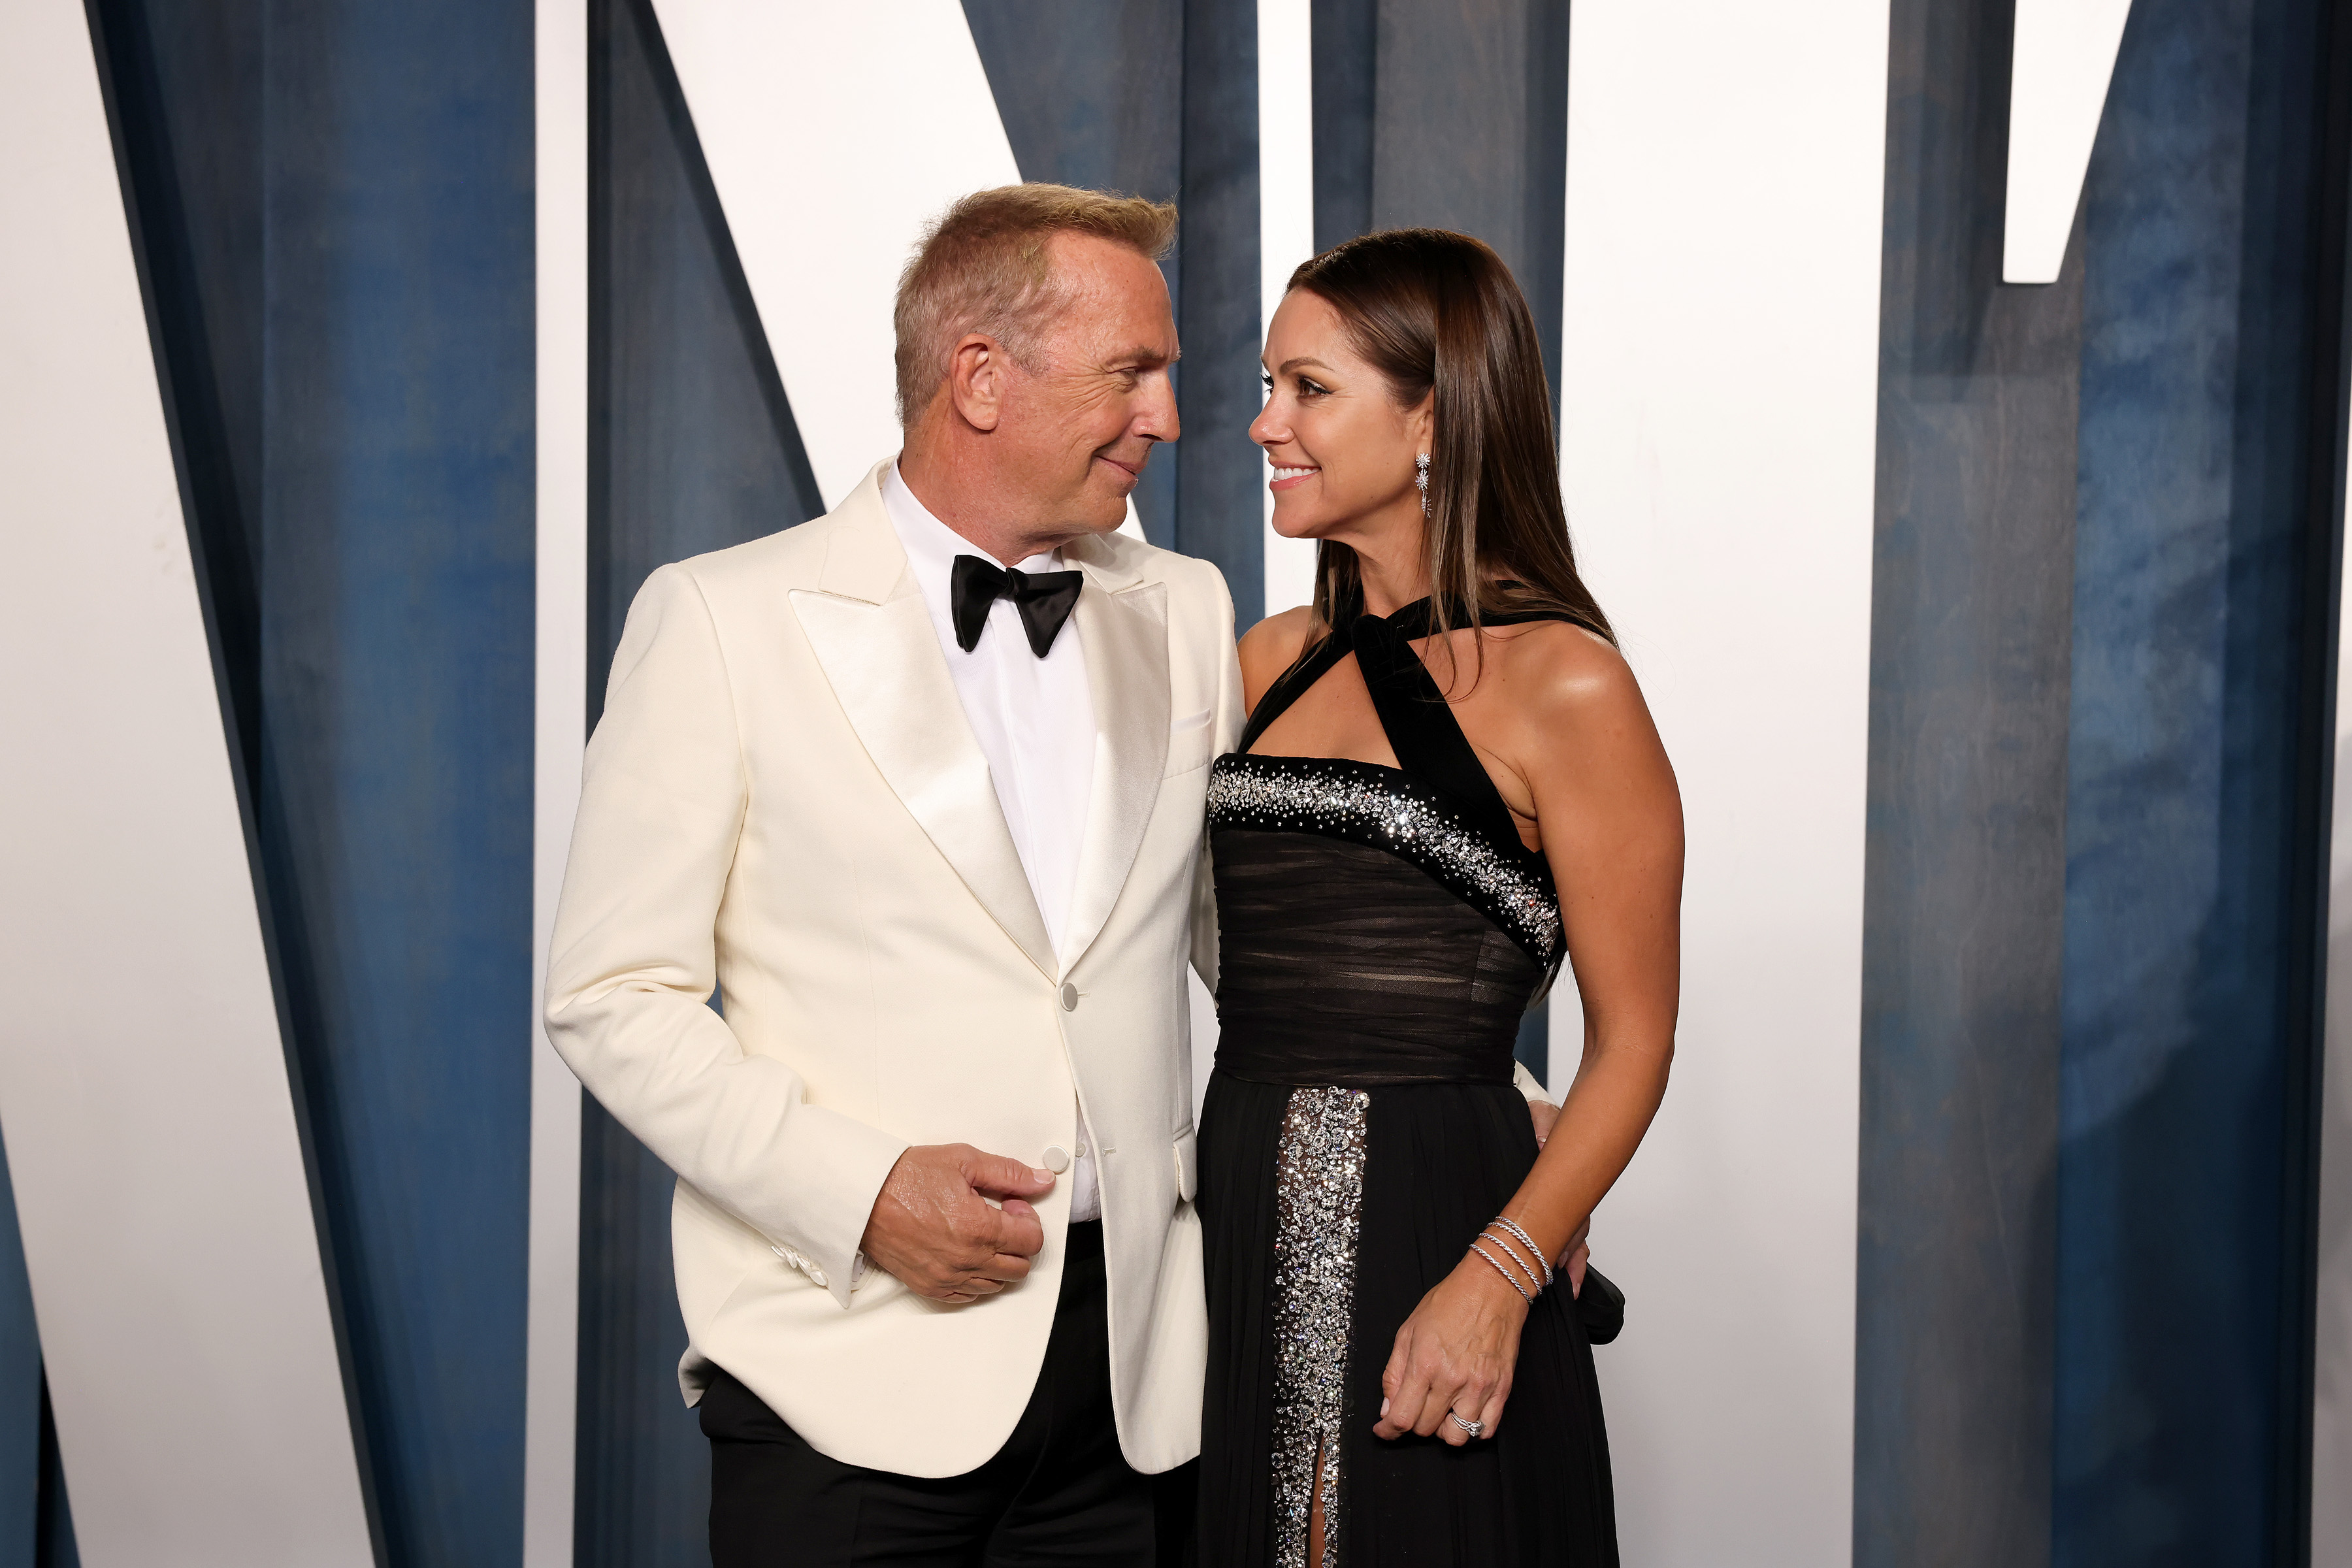 Kevin Costner and Christine Baumgartner at the Vanity Fair Oscar Party on March 27, 2022 in Beverly Hills, California. | Source: Getty Images